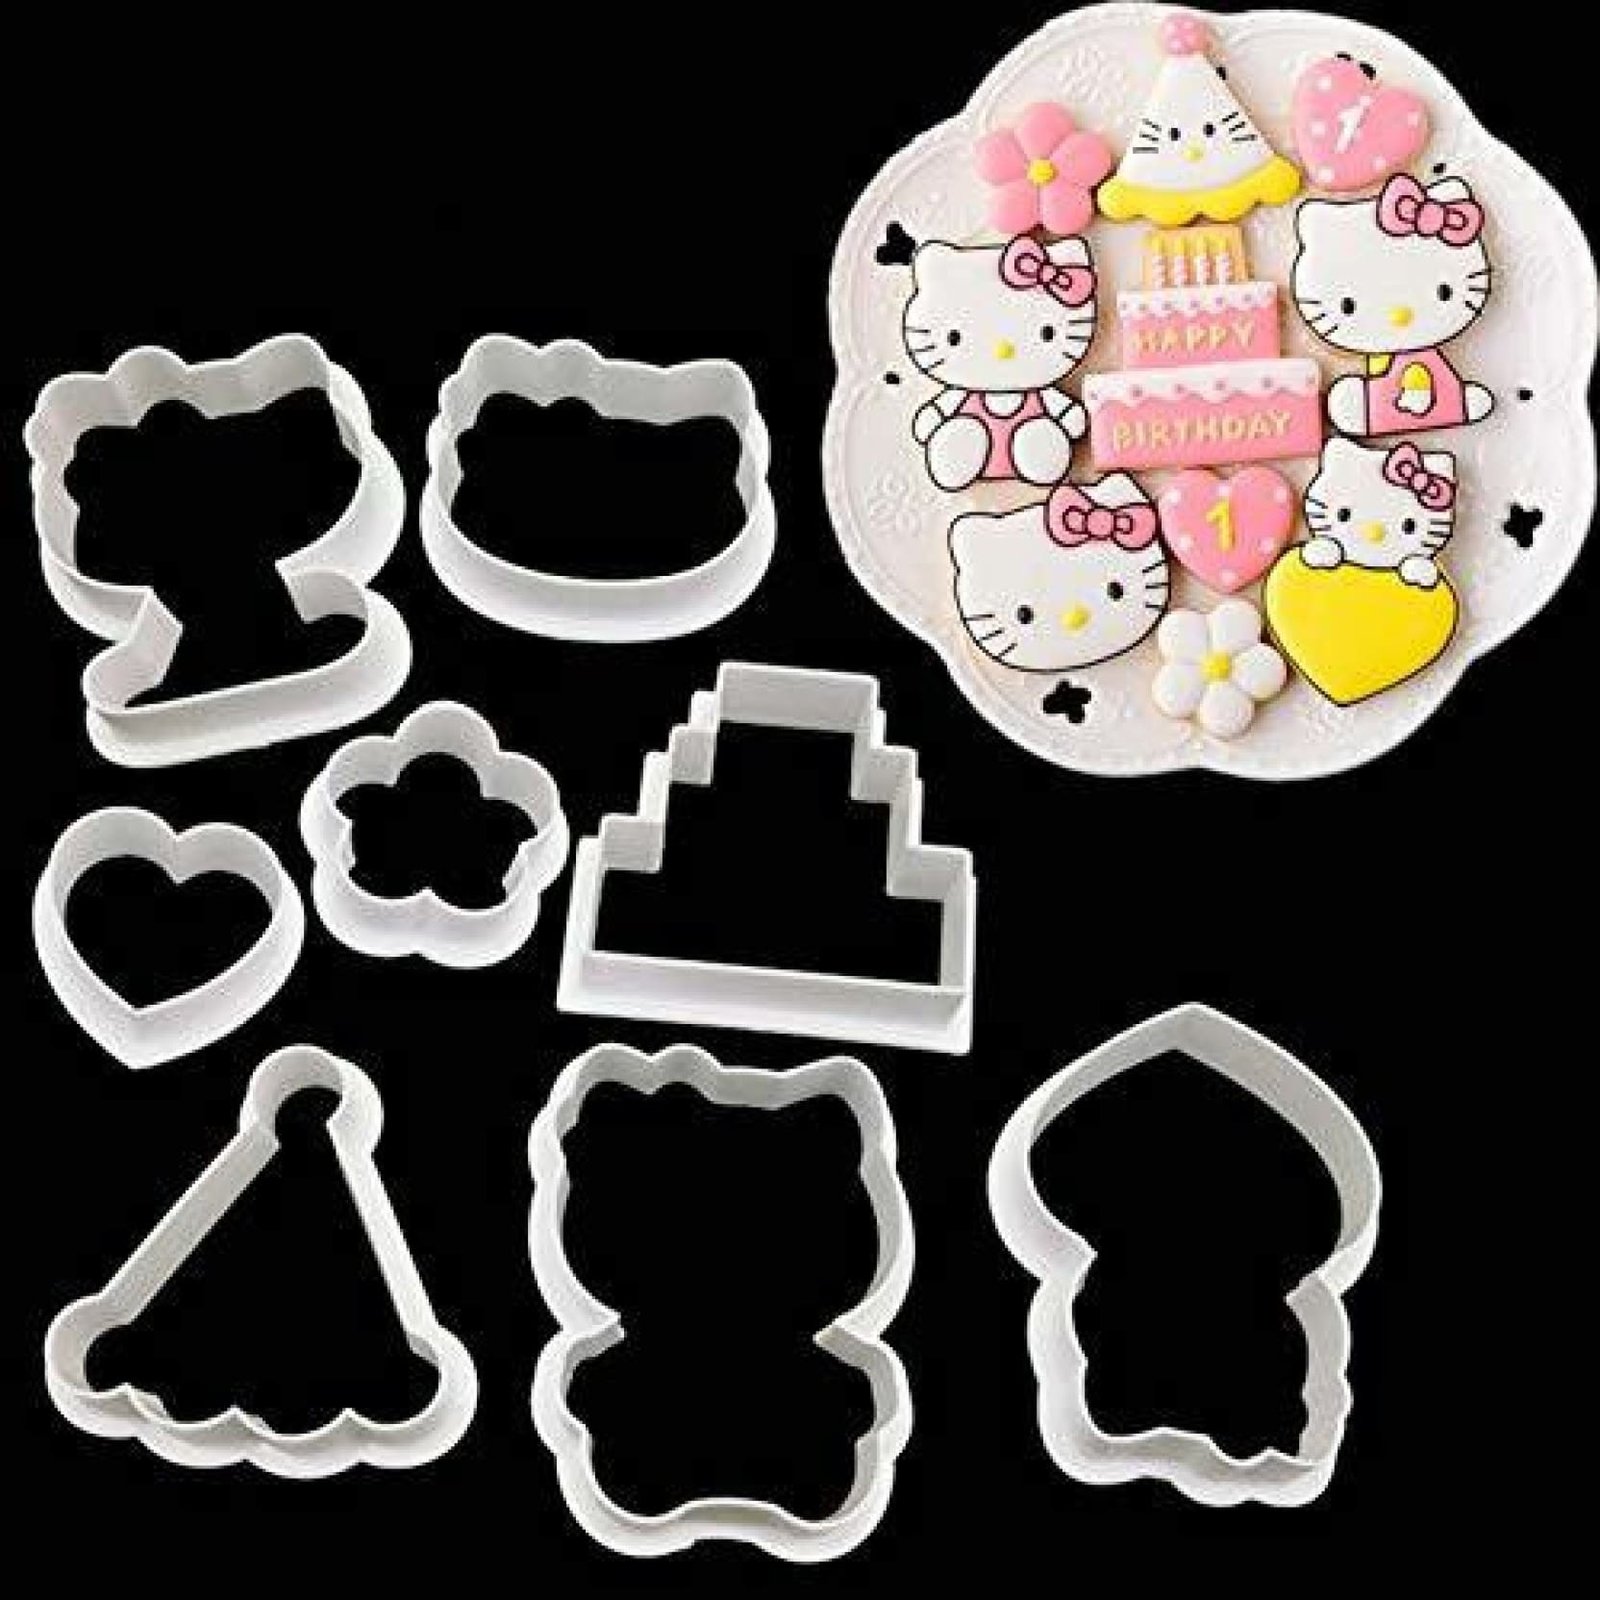 divinezon 12 Piece Set Stainless Steel Pastry Cookie Biscuit Cutter Cake  Muffin Decor Mold Mould Multifunctional Tool Cookie Cutter Price in India -  Buy divinezon 12 Piece Set Stainless Steel Pastry Cookie